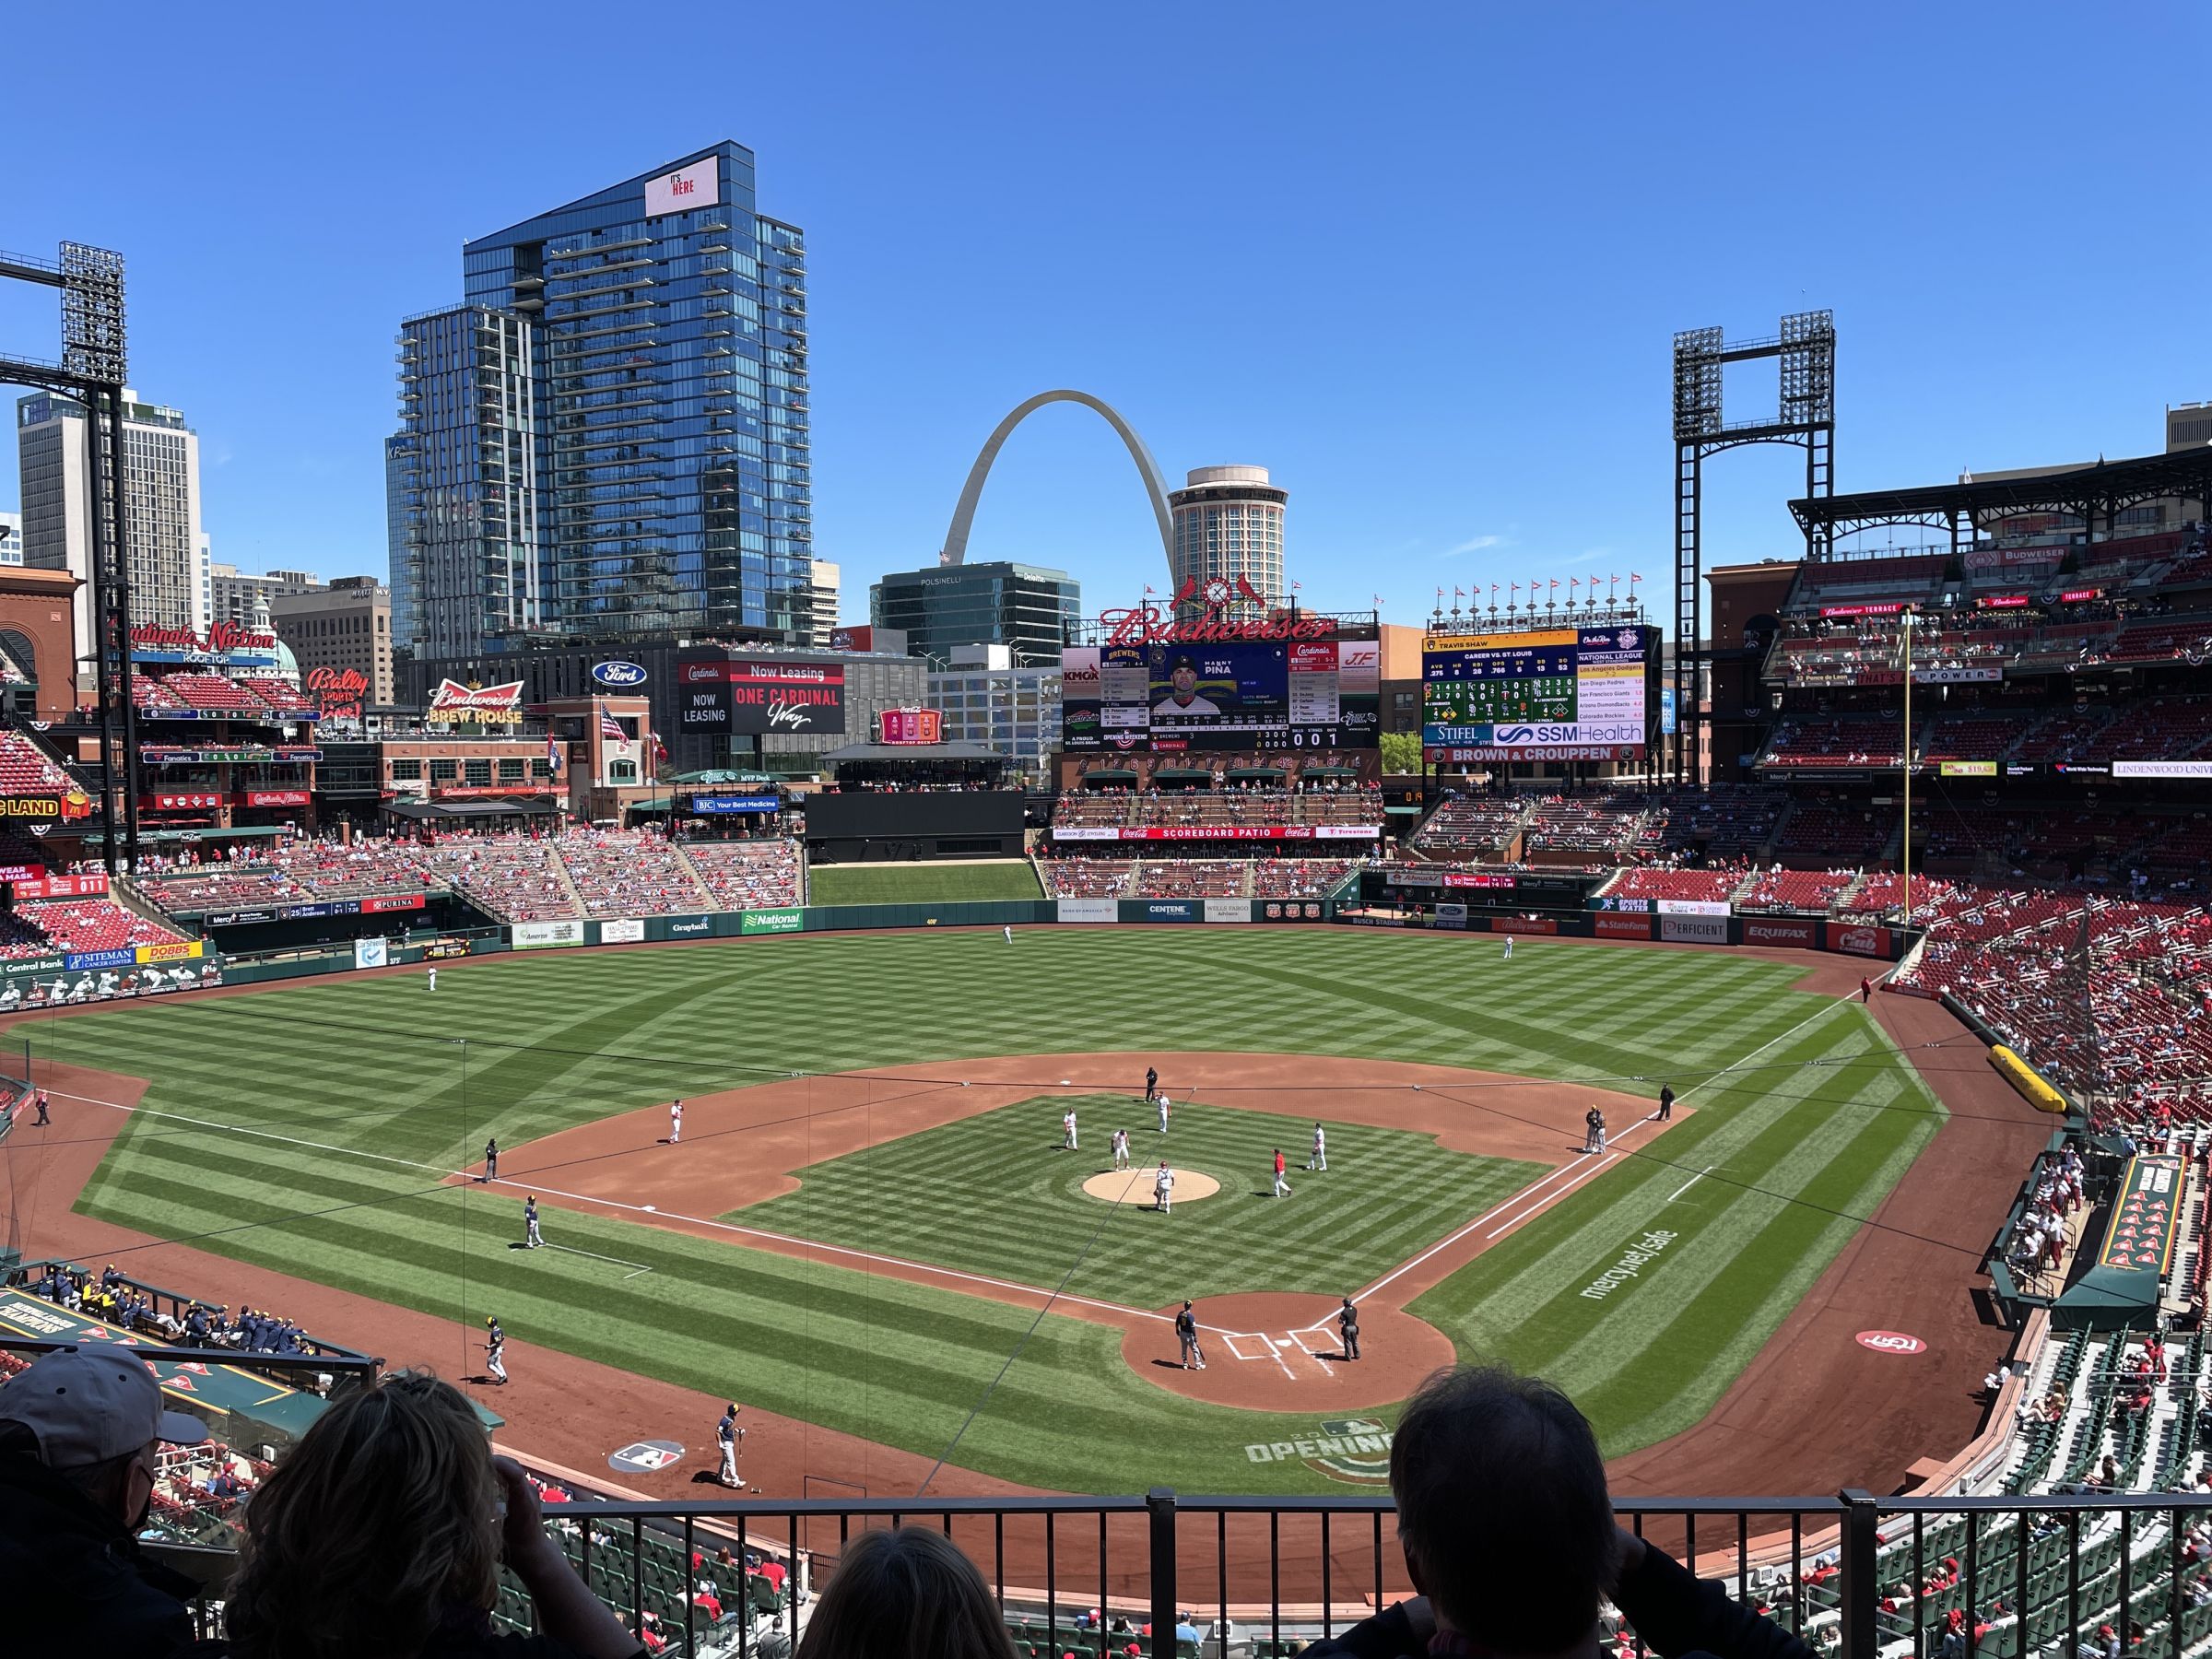 section 251, row 4 seat view  - busch stadium